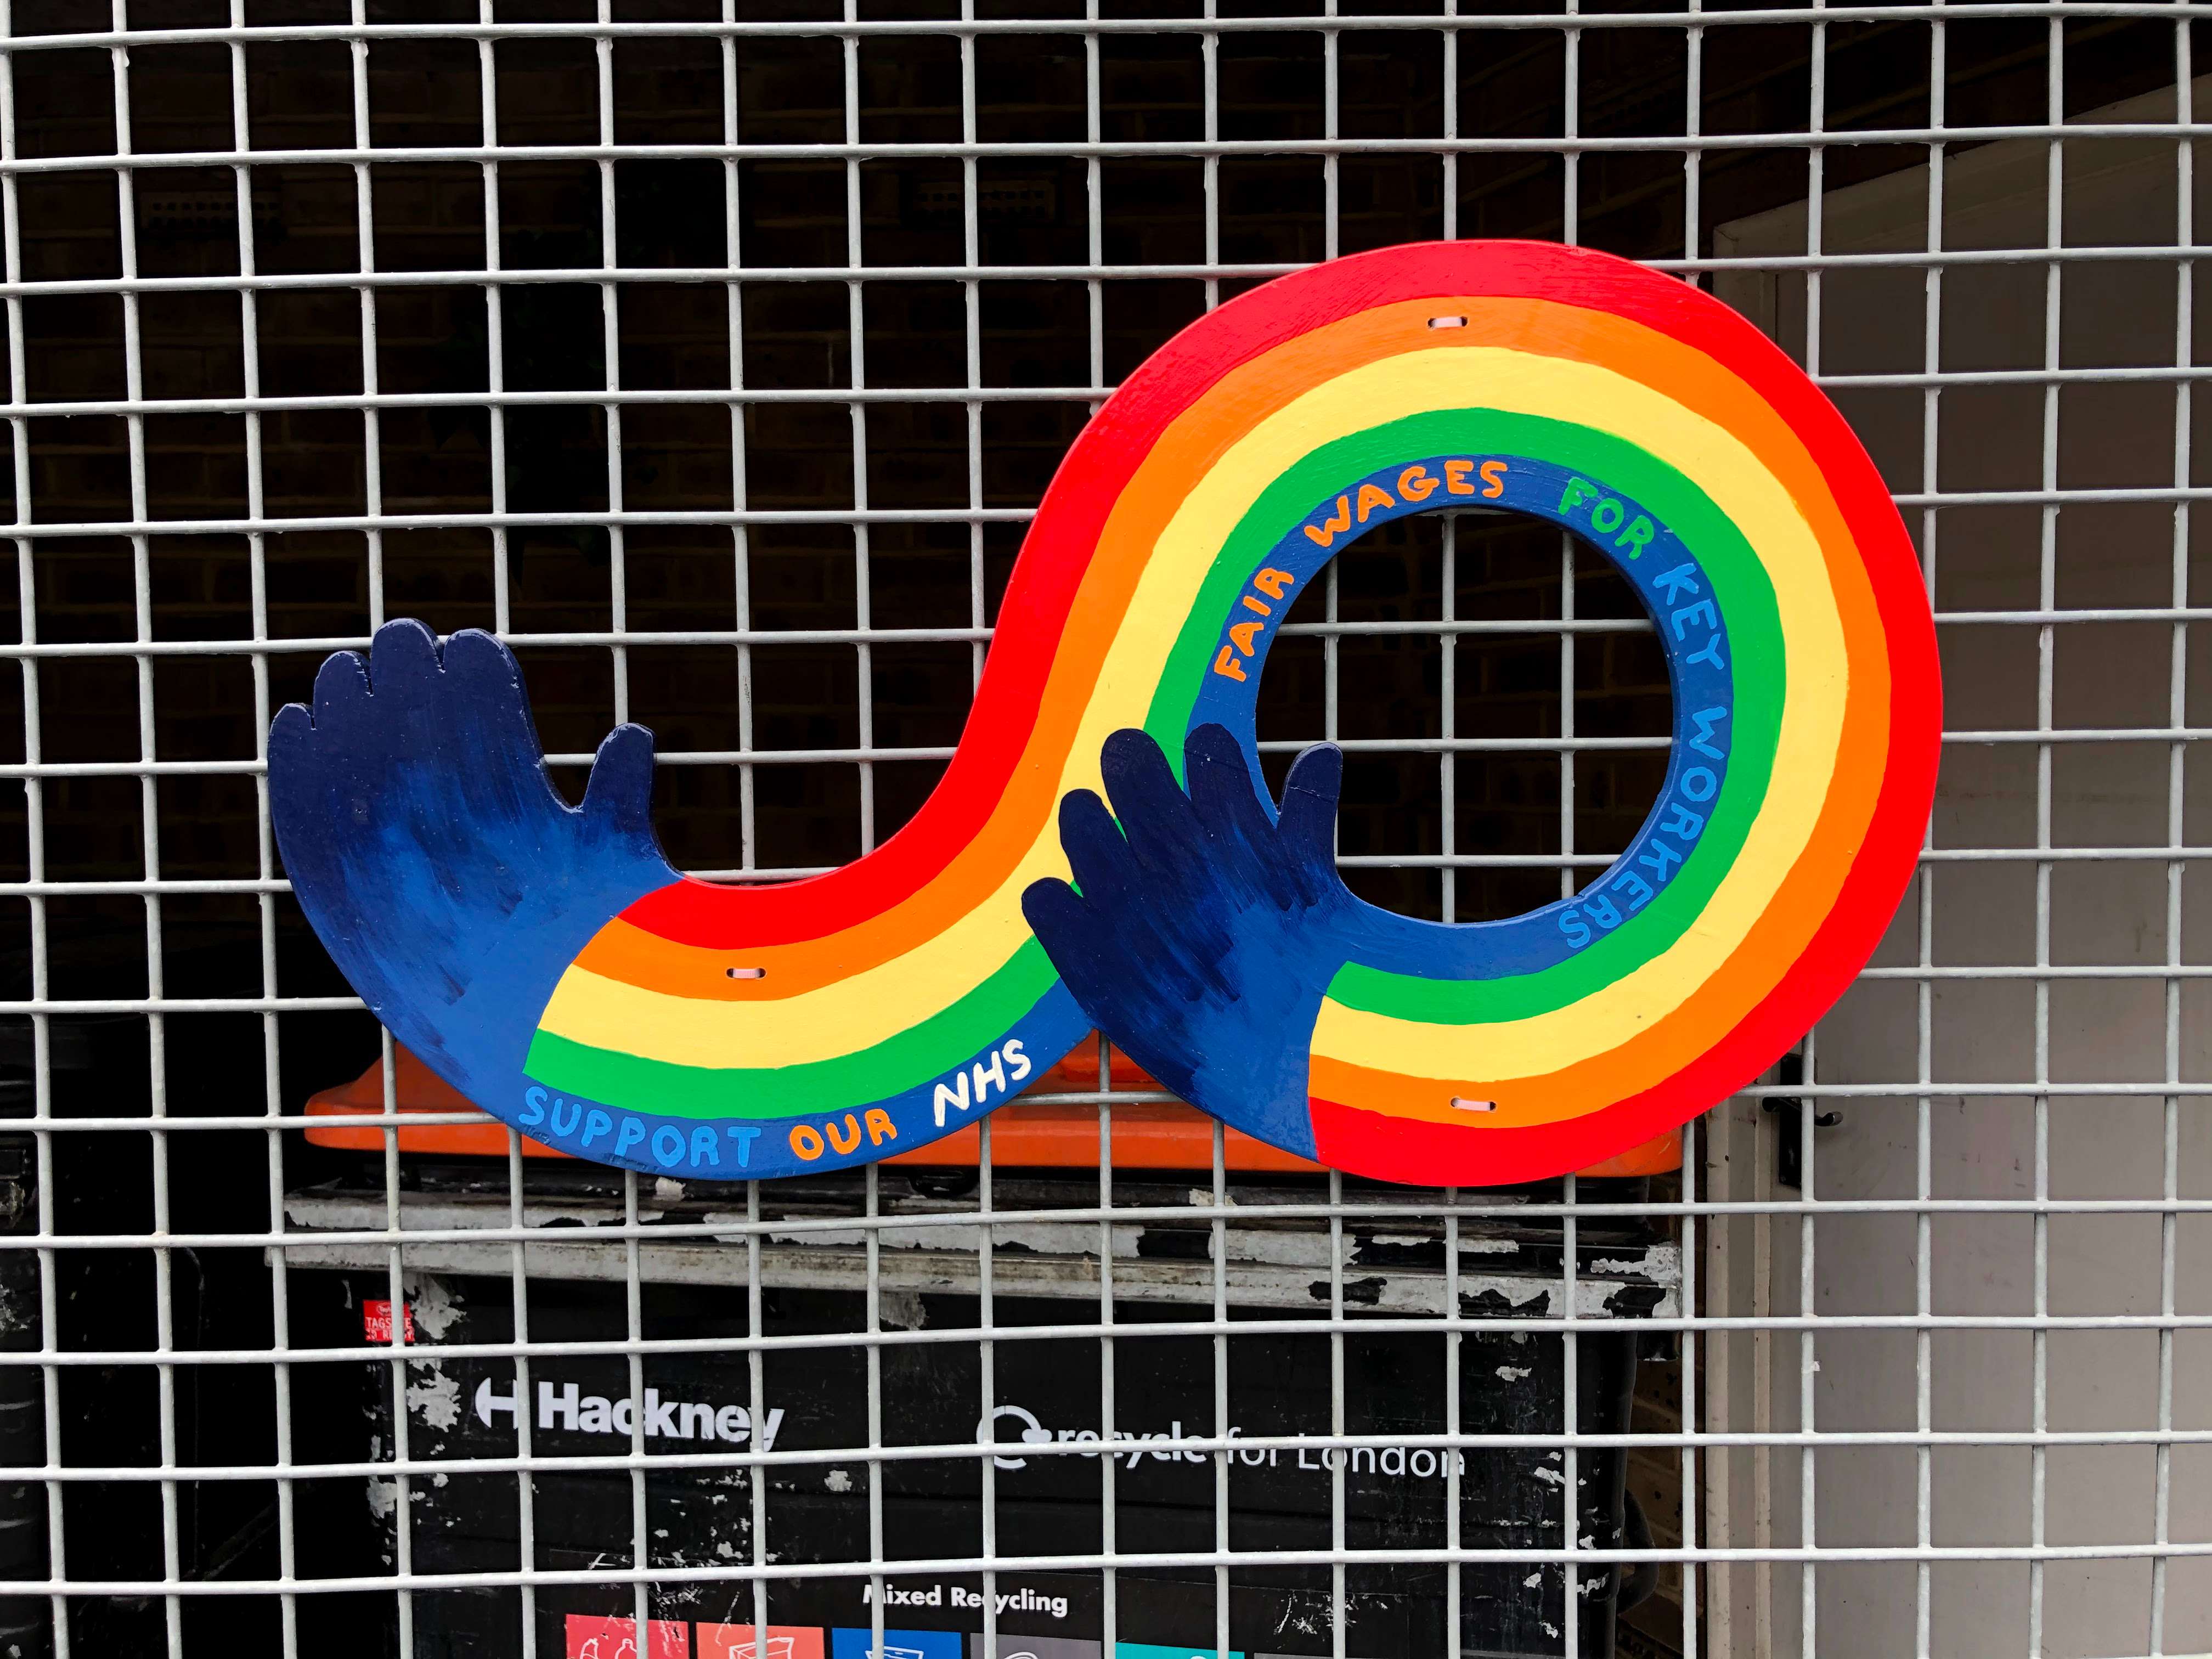 Rainbow colours with hands at each. Words 'Support Our NHS, Fair Wages for Key Workers' written on the blue band of the rainbow. The graphic is attached to a metal fence.